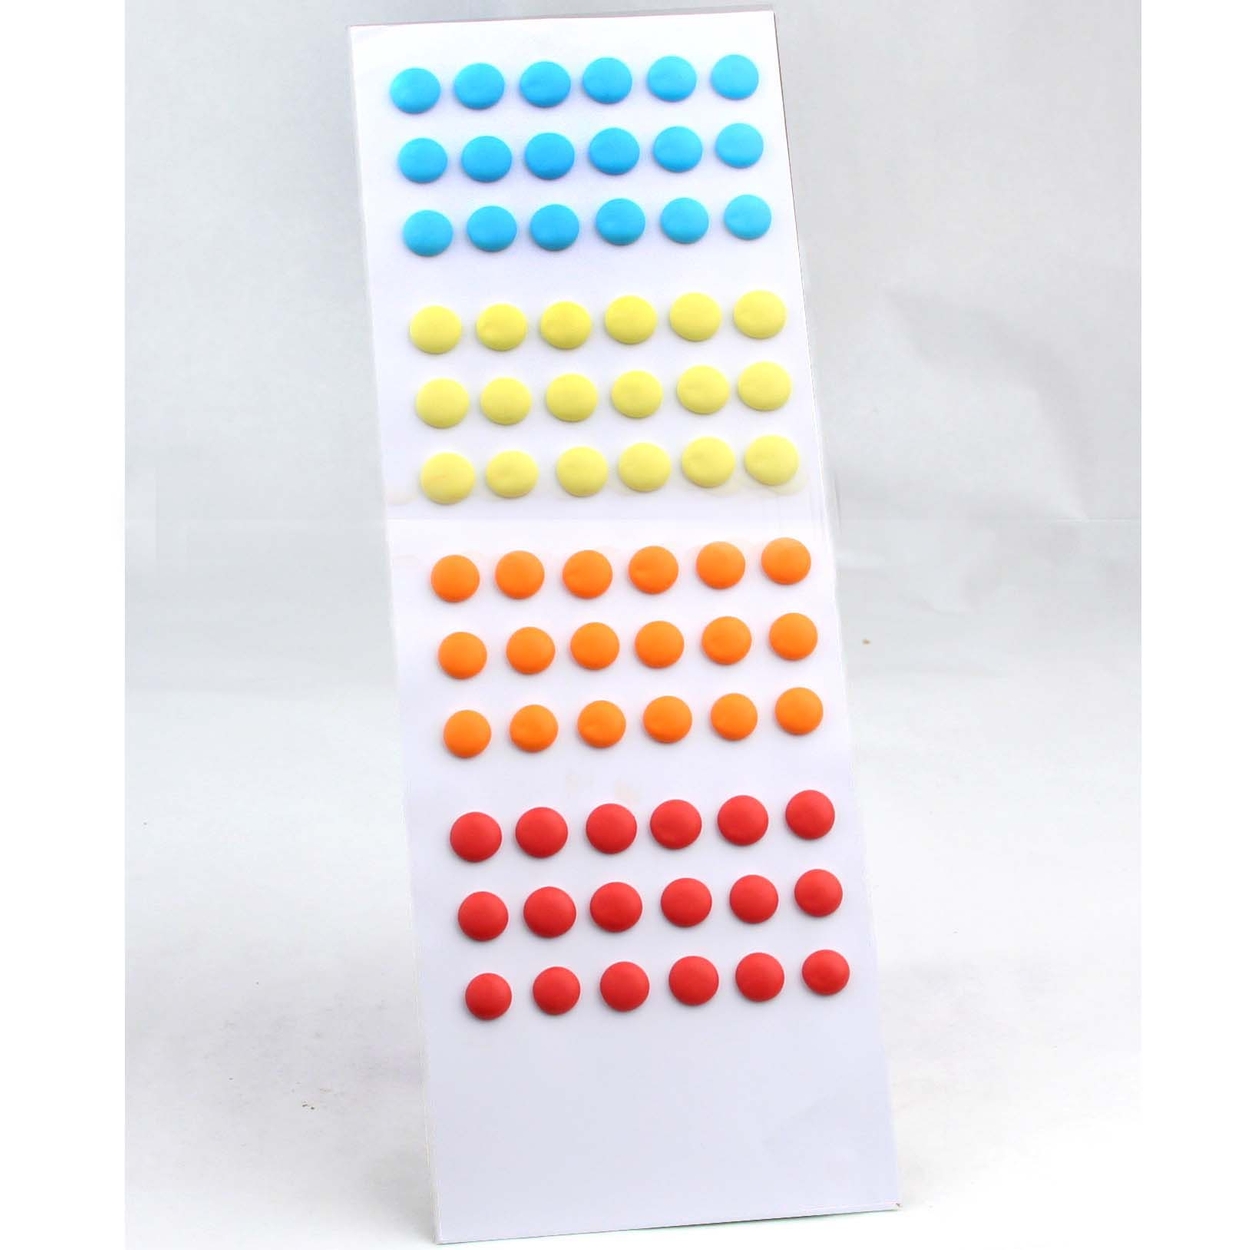  Candy Buttons